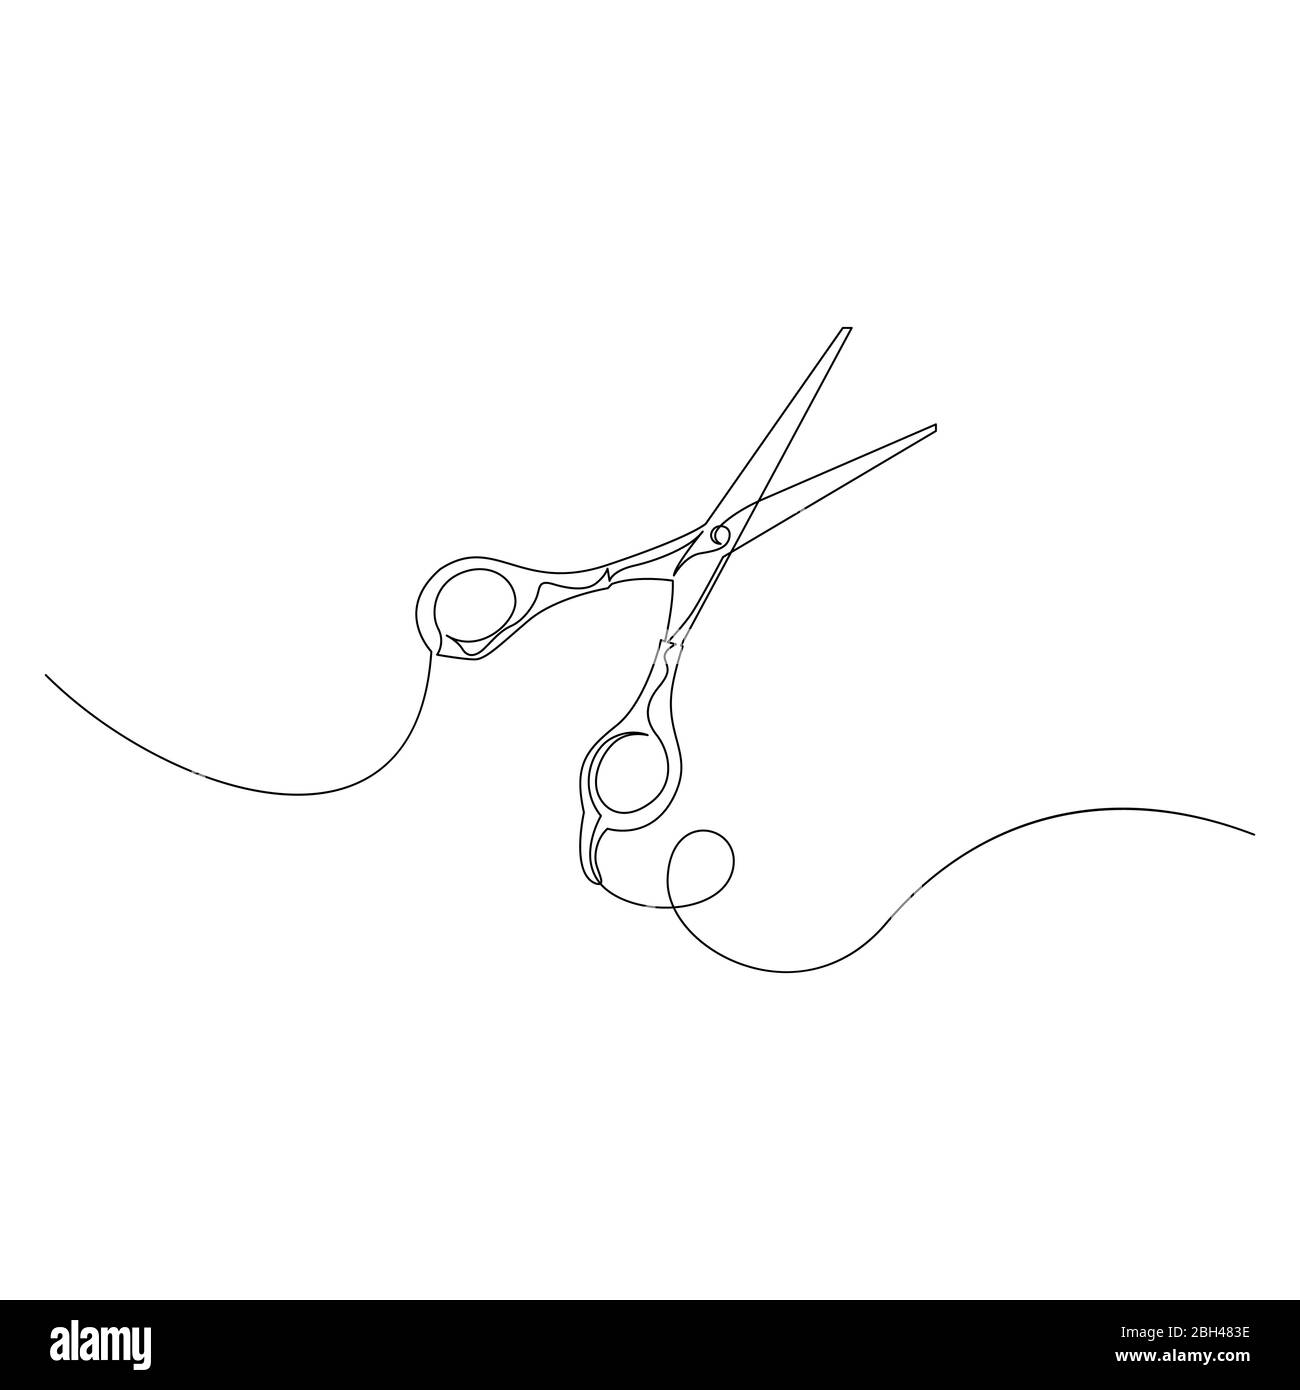 Continuous one line drawing scissors. Vector illustration. Stock Vector